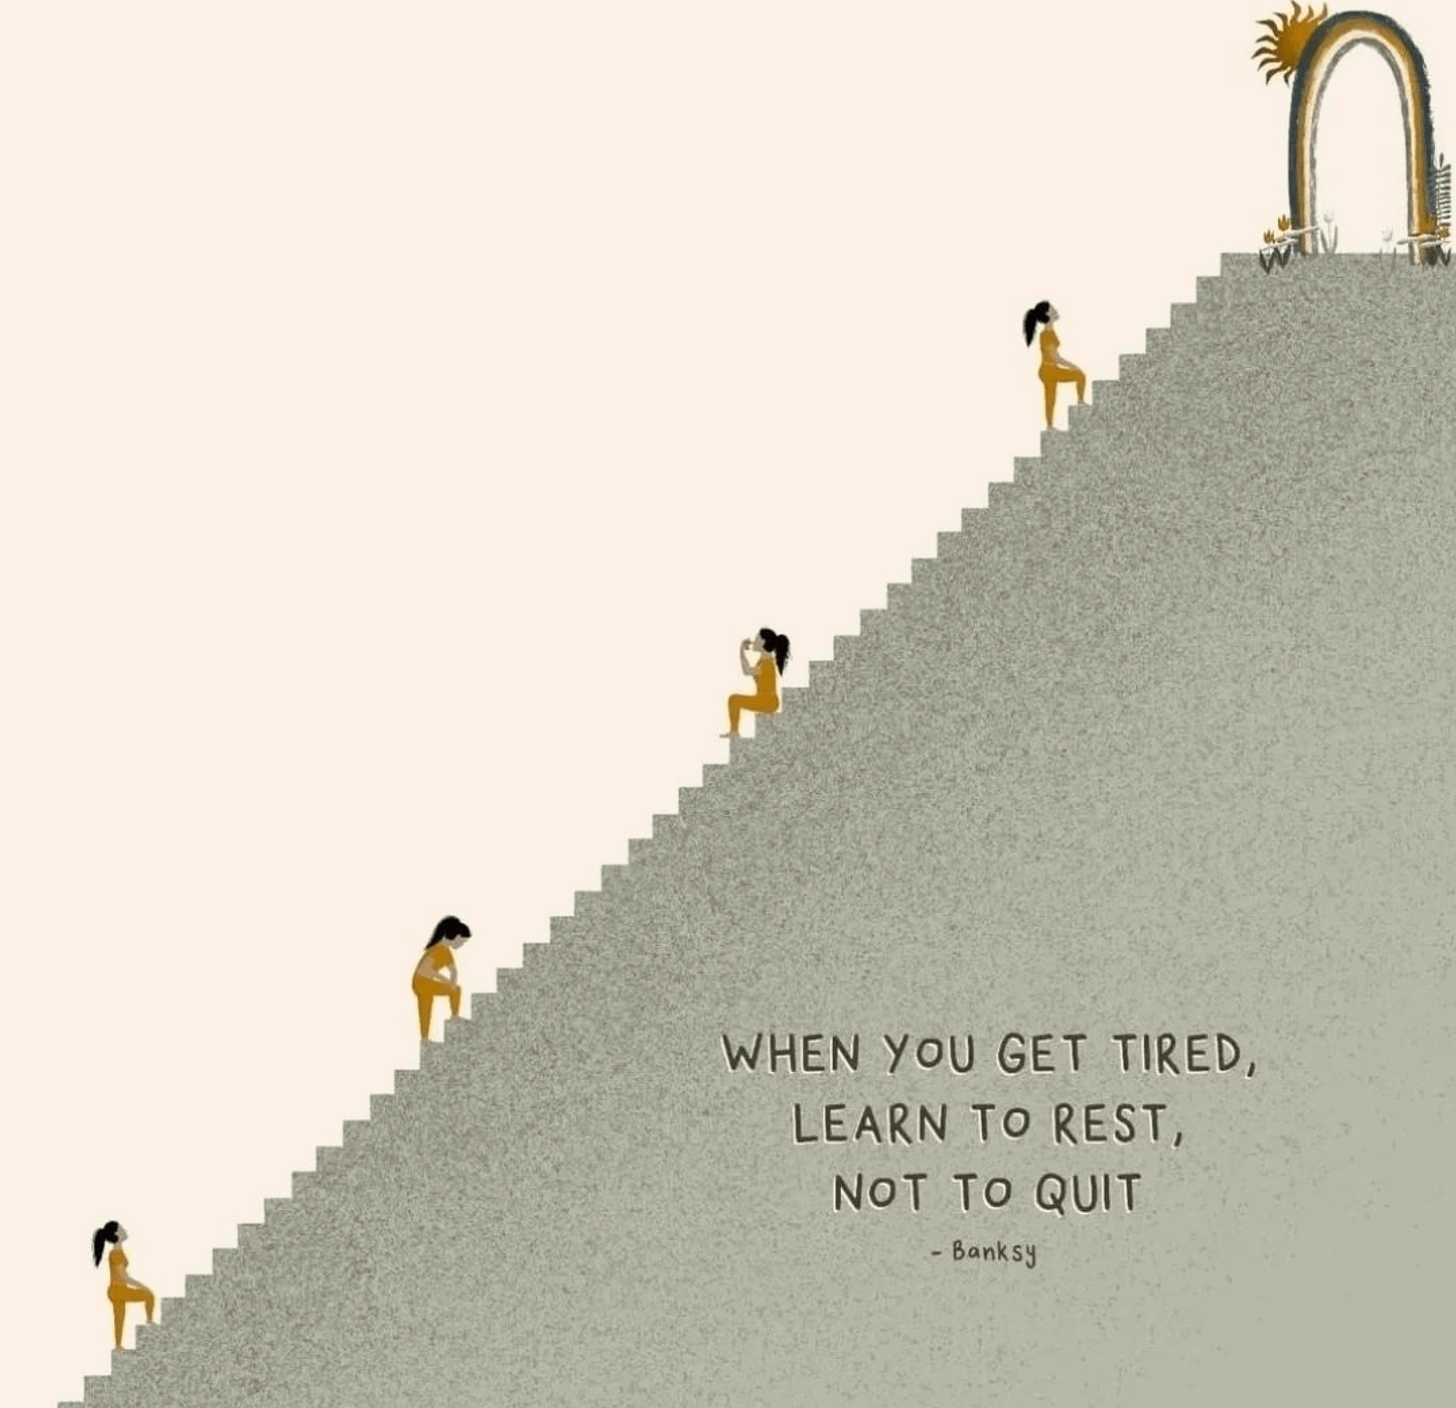 Image] When you get tired, learn to rest, not to quit. : r/GetMotivated